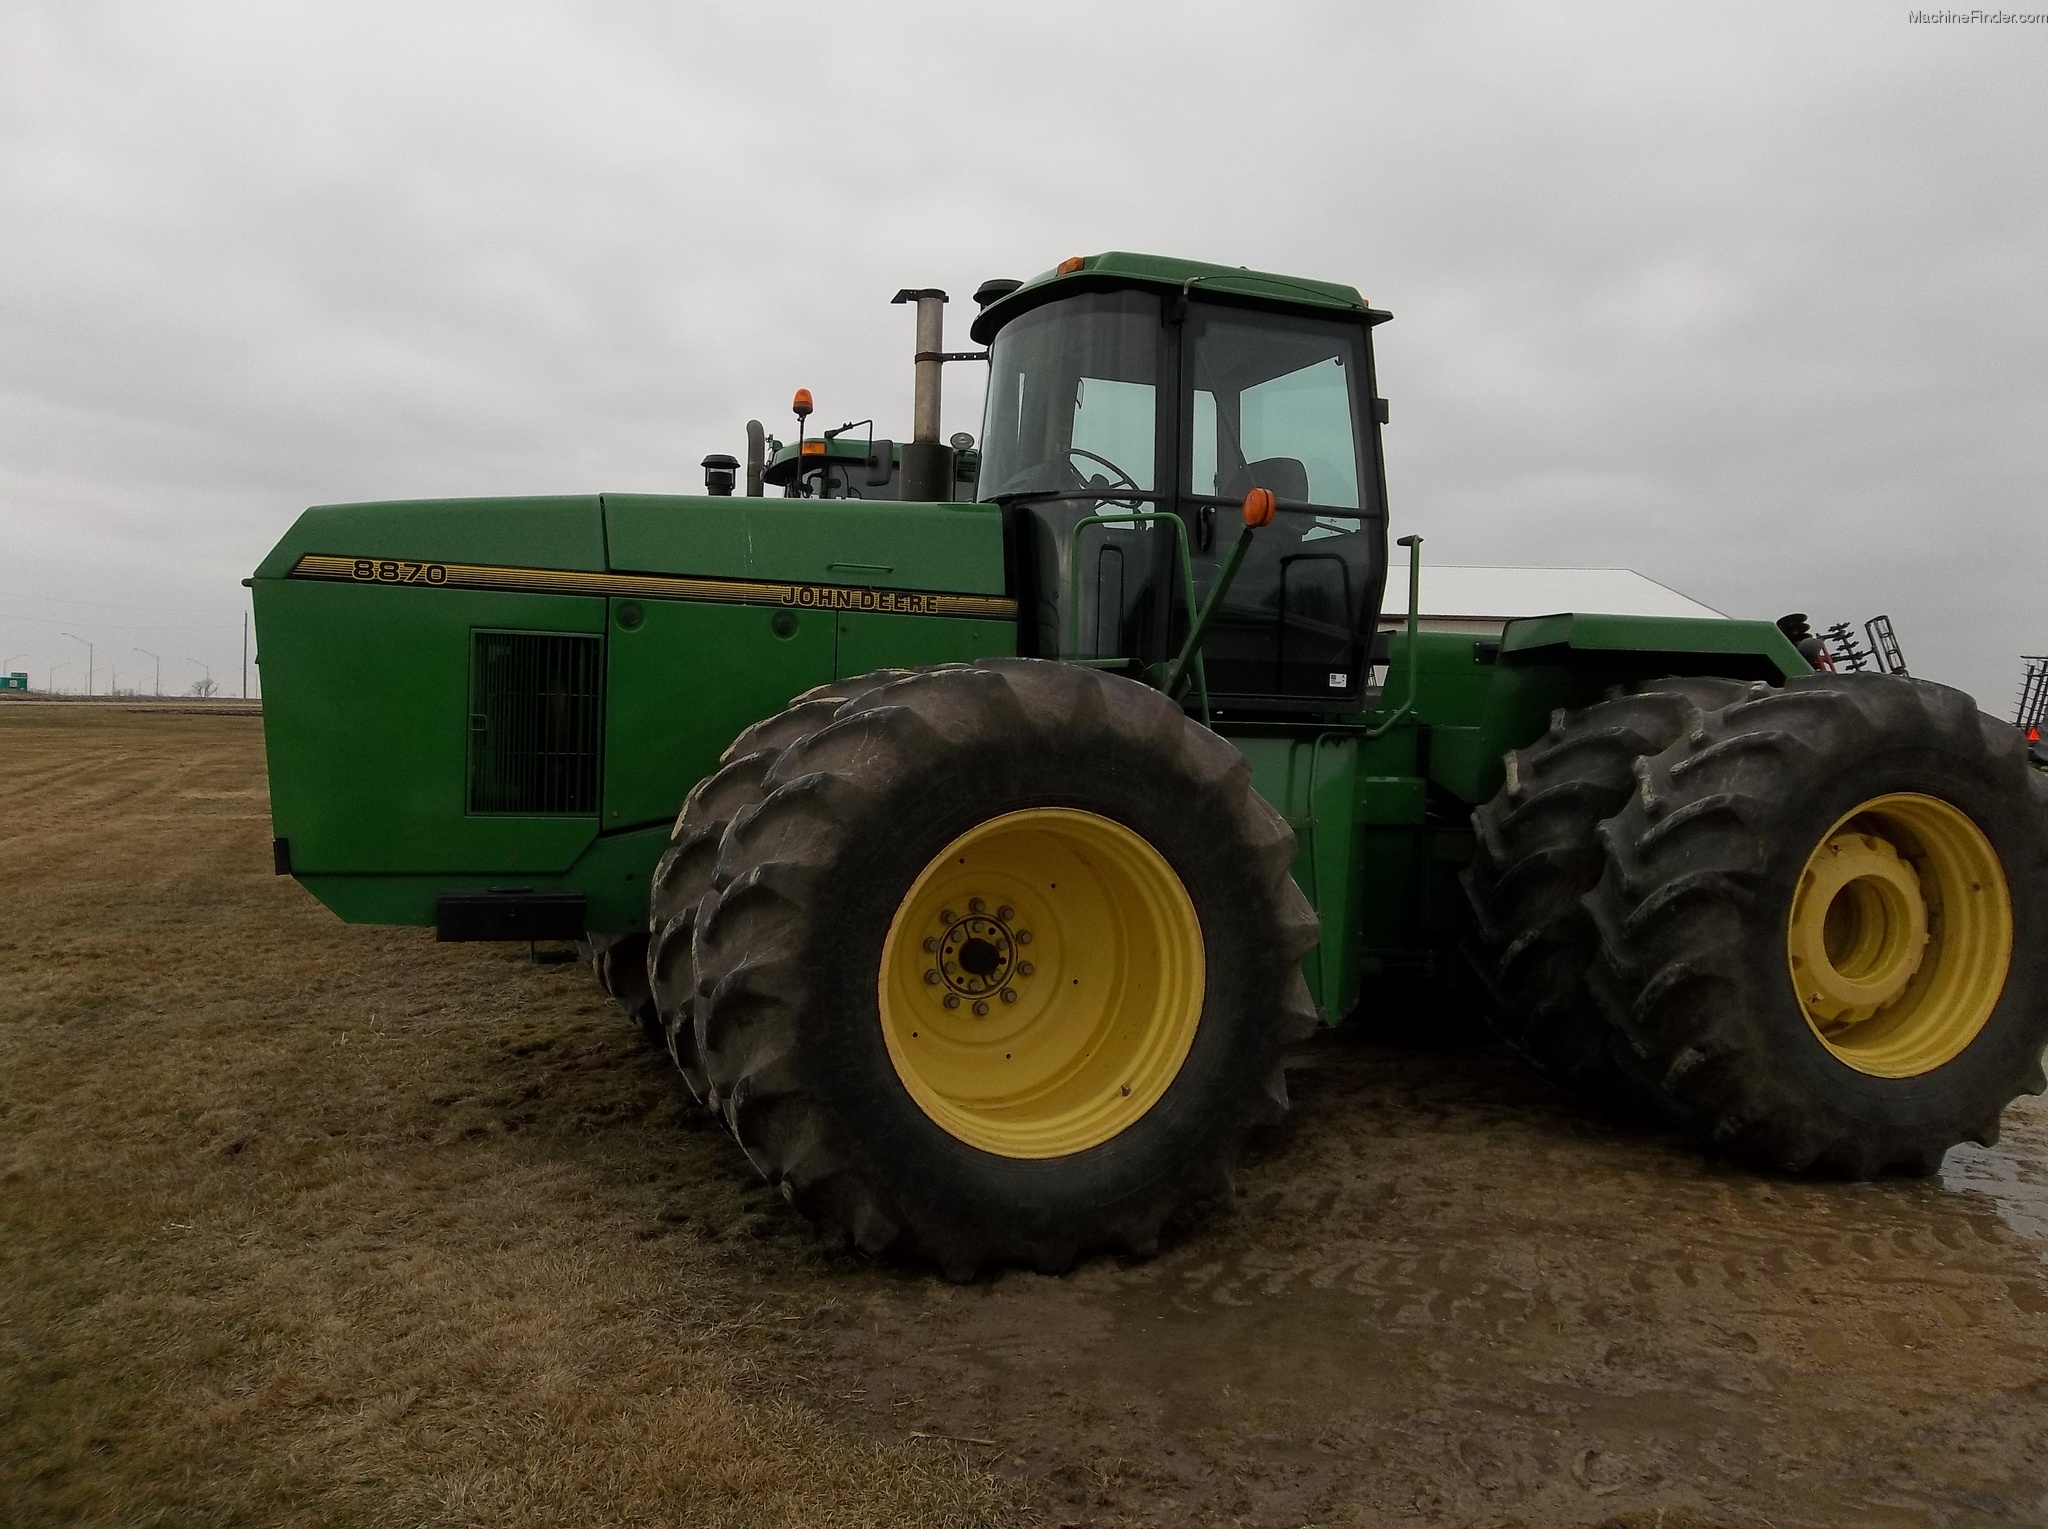 Image Gallery: A Review of the John Deere 8870